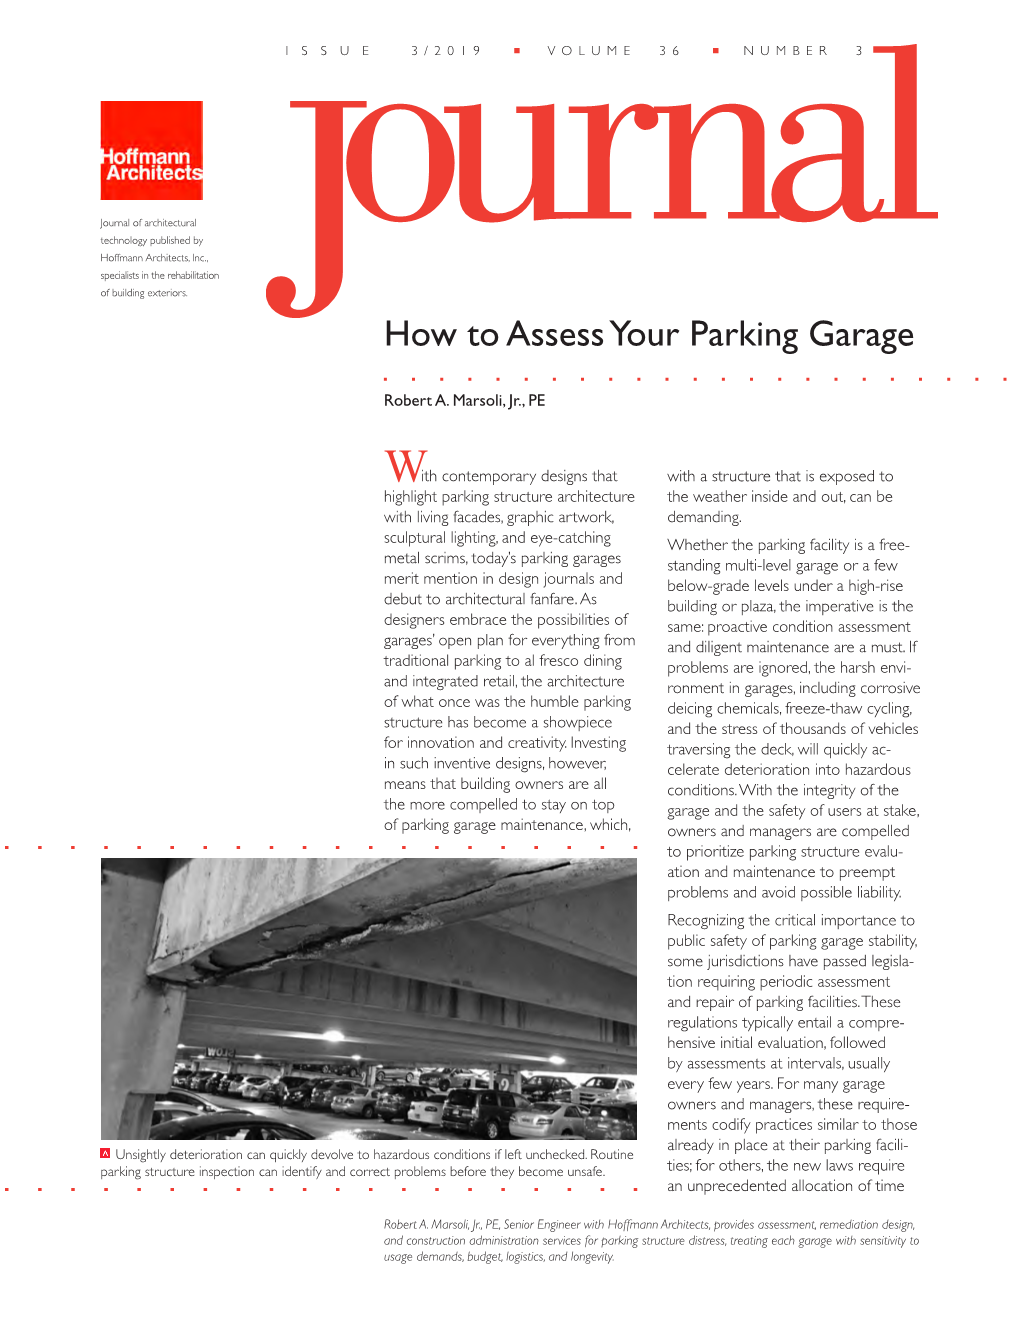 How to Assess Your Parking Garage